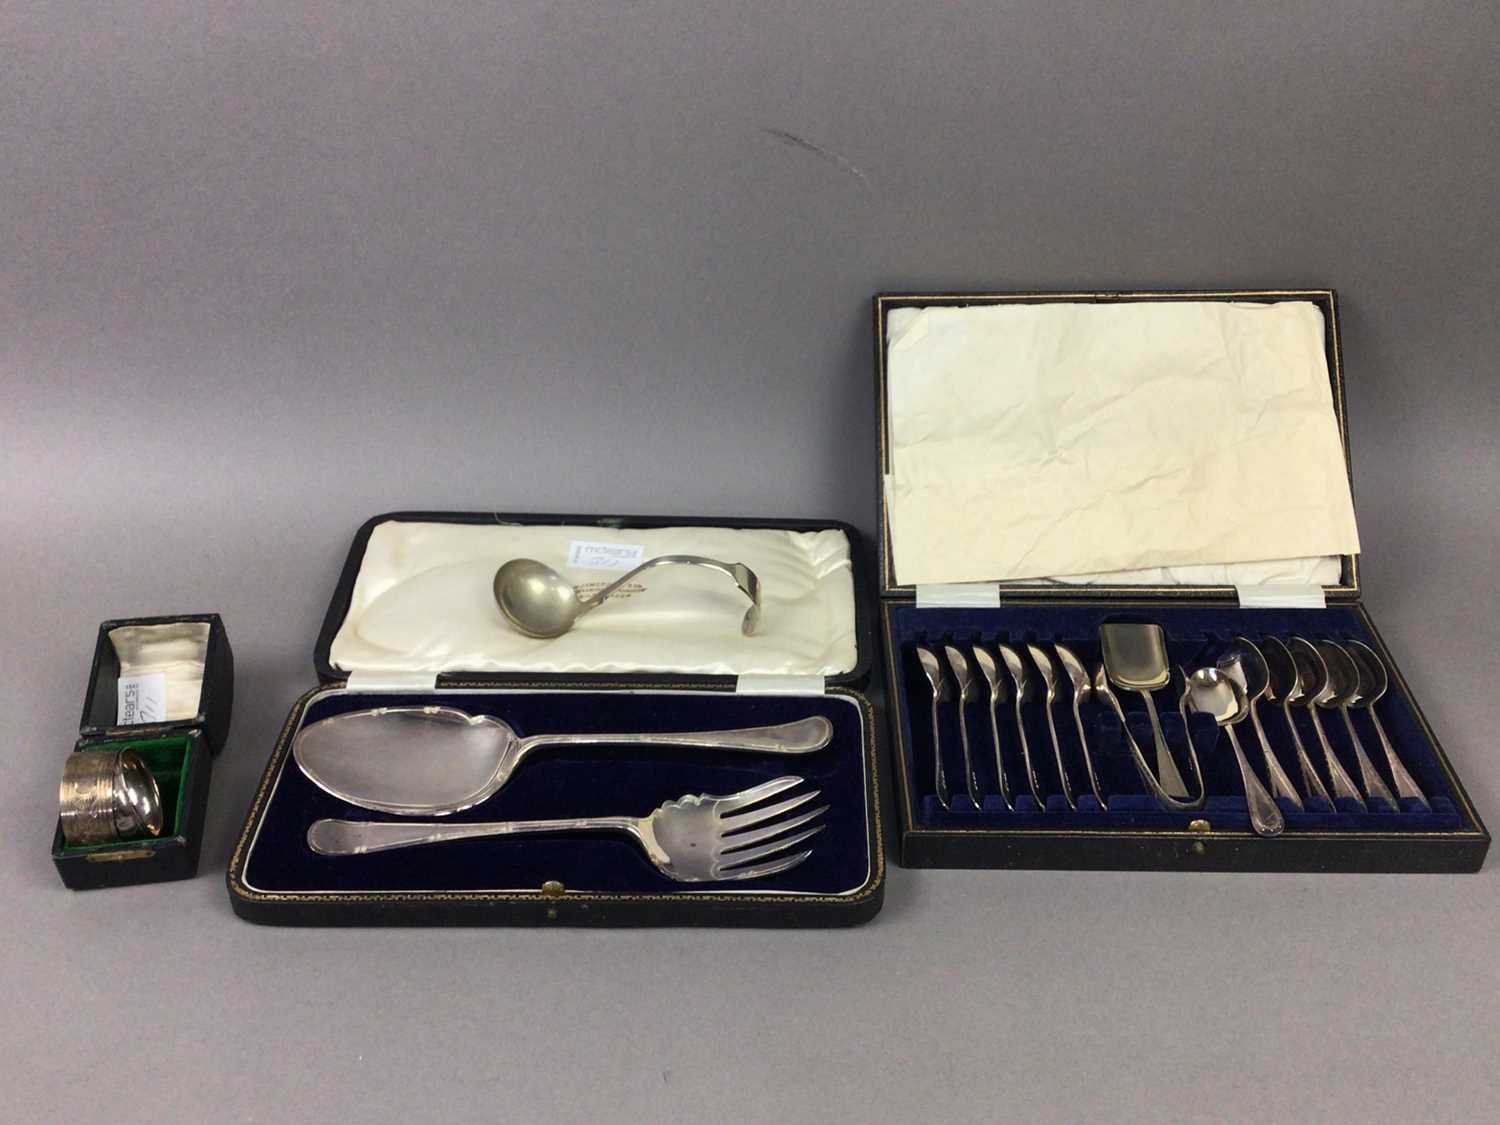 A SILVER CHRISTENING SET, CASED CUTLERY AND NAPKIN RINGS - Image 2 of 2